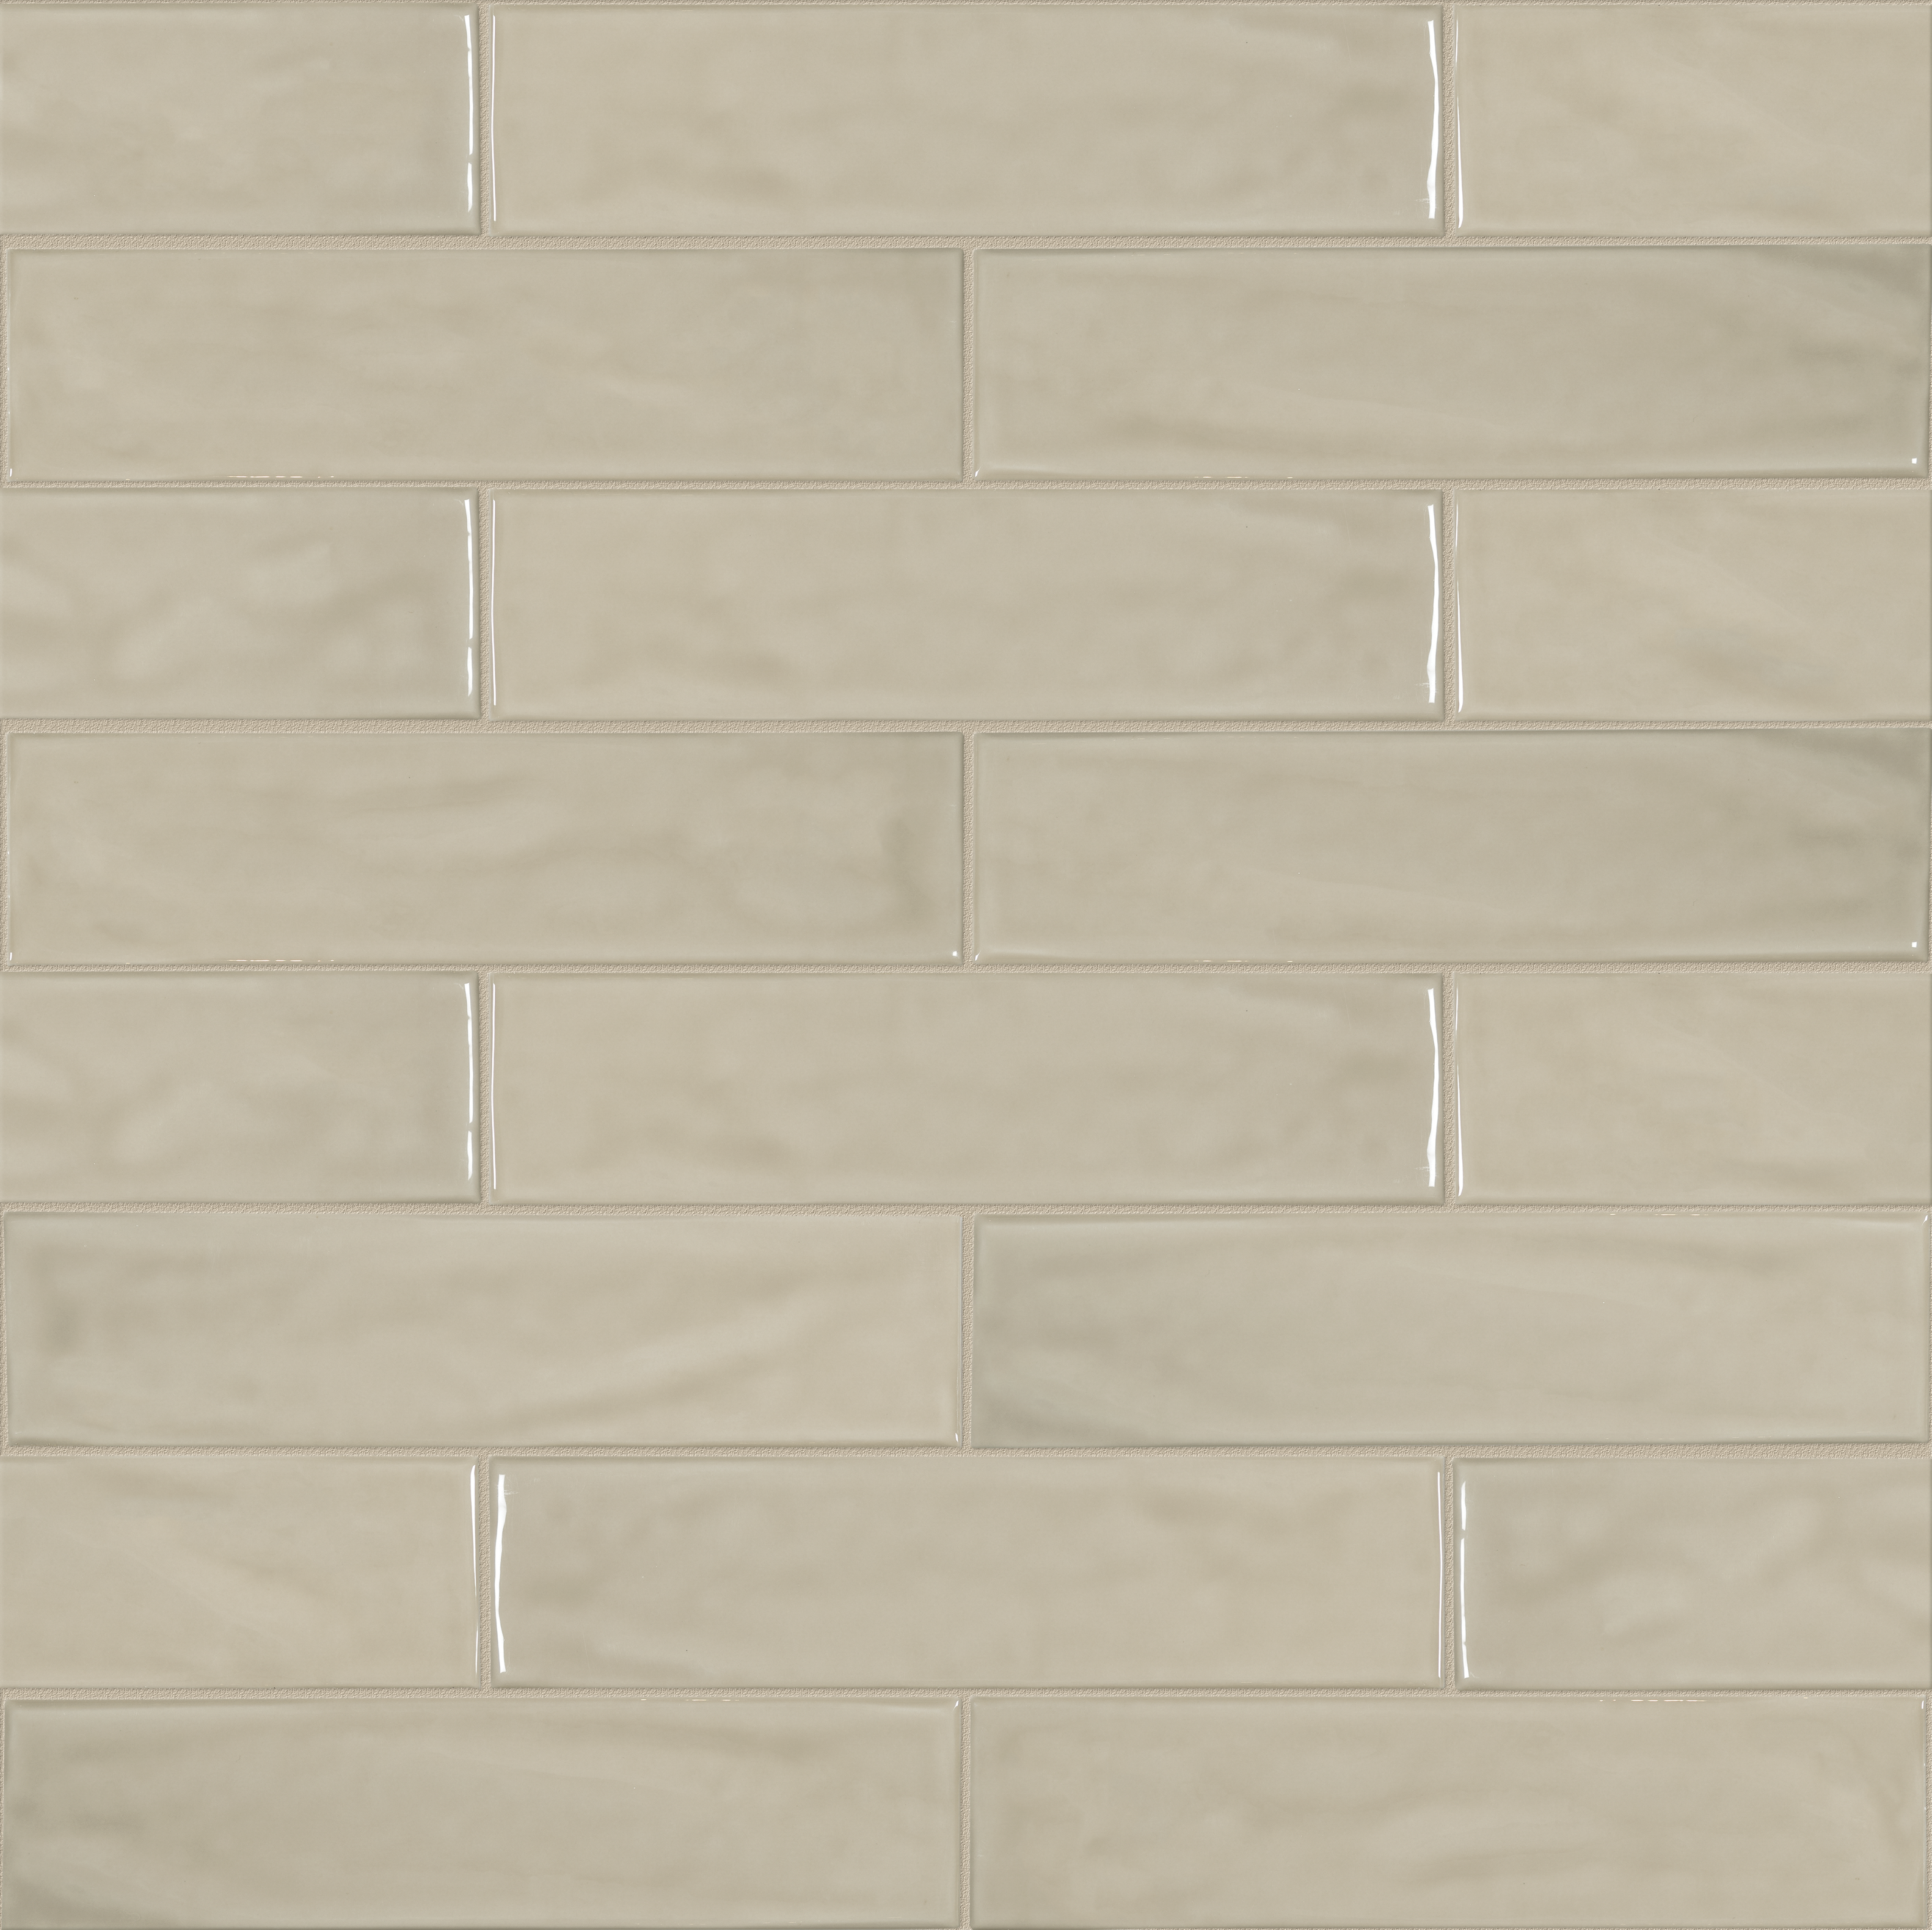 earth pattern glazed ceramic field tile from marlow anatolia collection distributed by surface group international glossy finish pressed edge 3x12 rectangle shape